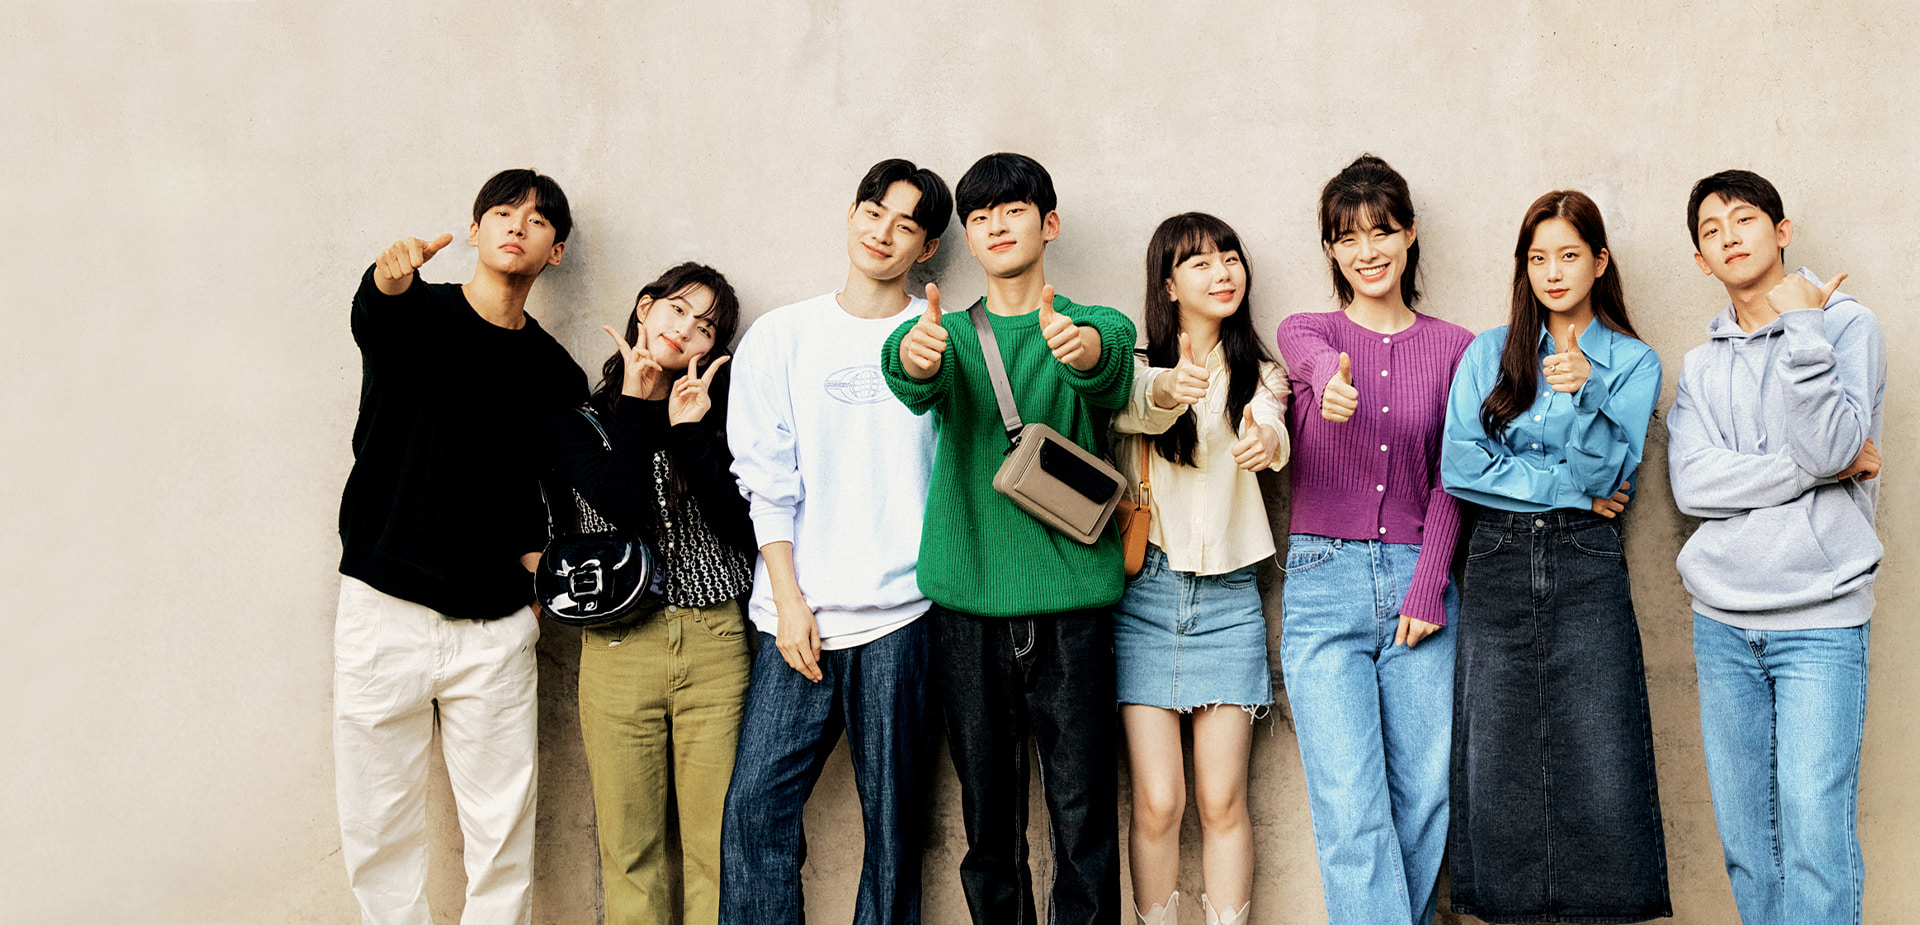 An image of the cast of ‘MBTI Love’, an original, shoppable K-drama series by CHARLES & KEITH and popular YouTube channel  Dingo Story  - CHARLES & KEITH